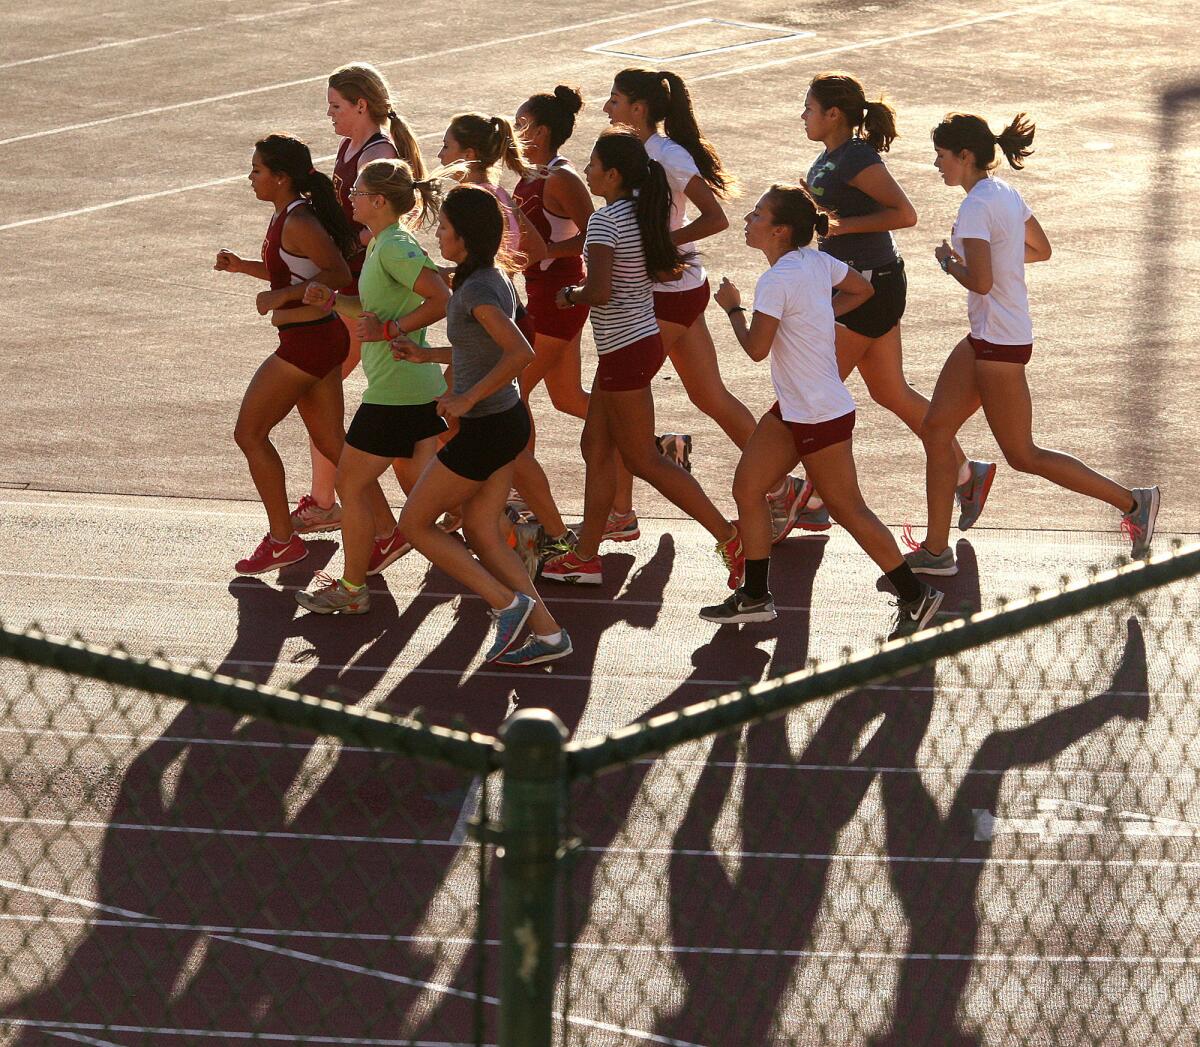 Glendale Community College women's cross country team during practice at GCC during an afternoon practice on Wednesday, Aug. 28, 2013.